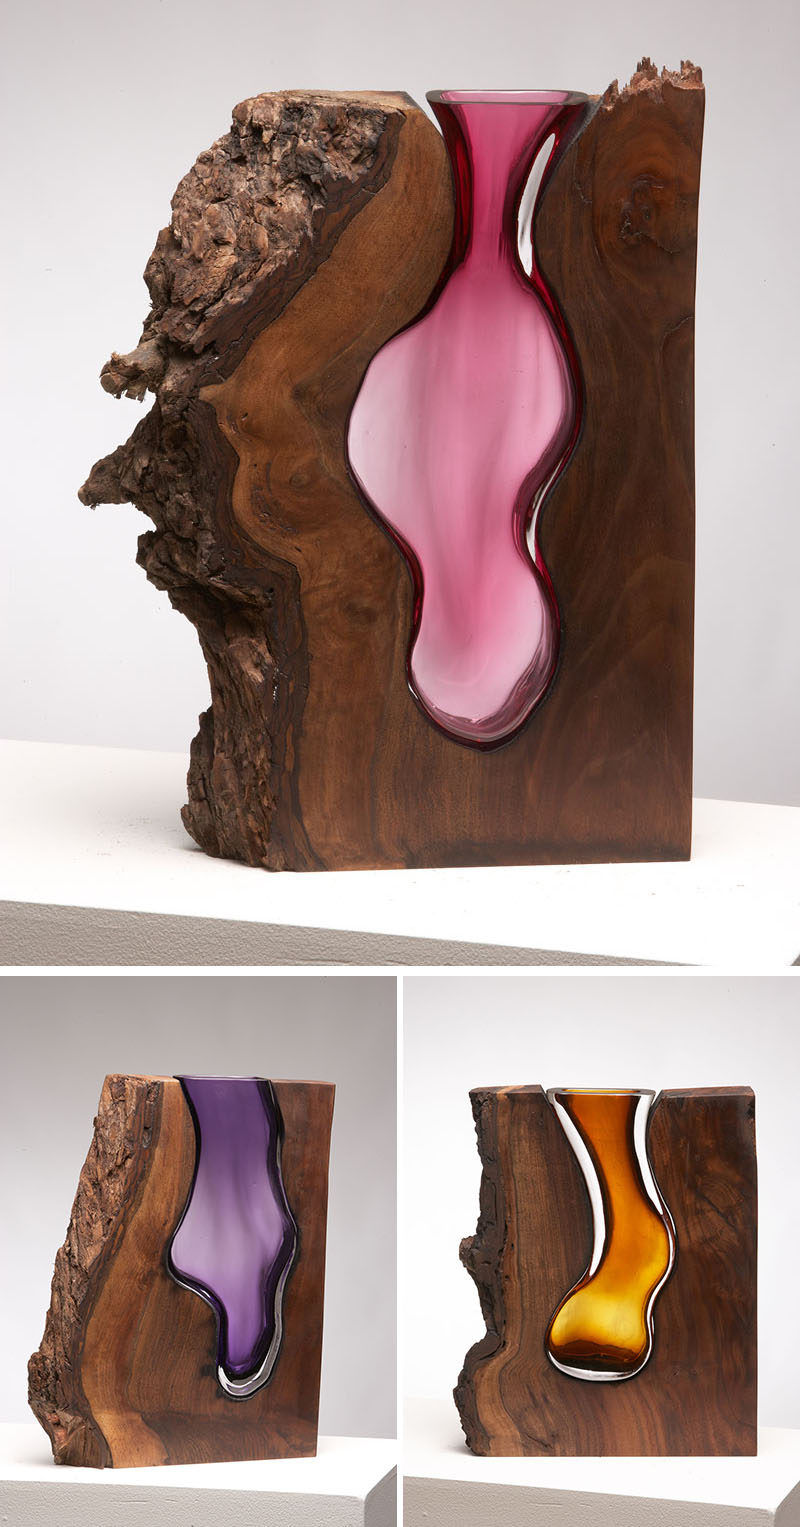 Scott Slagerman Studio collaborated with Jim Fishman to create the Wood and Glass Collection, a group of sculptural pieces that are made from fallen trees and hand blown glass. #Sculpture #Decor #Art